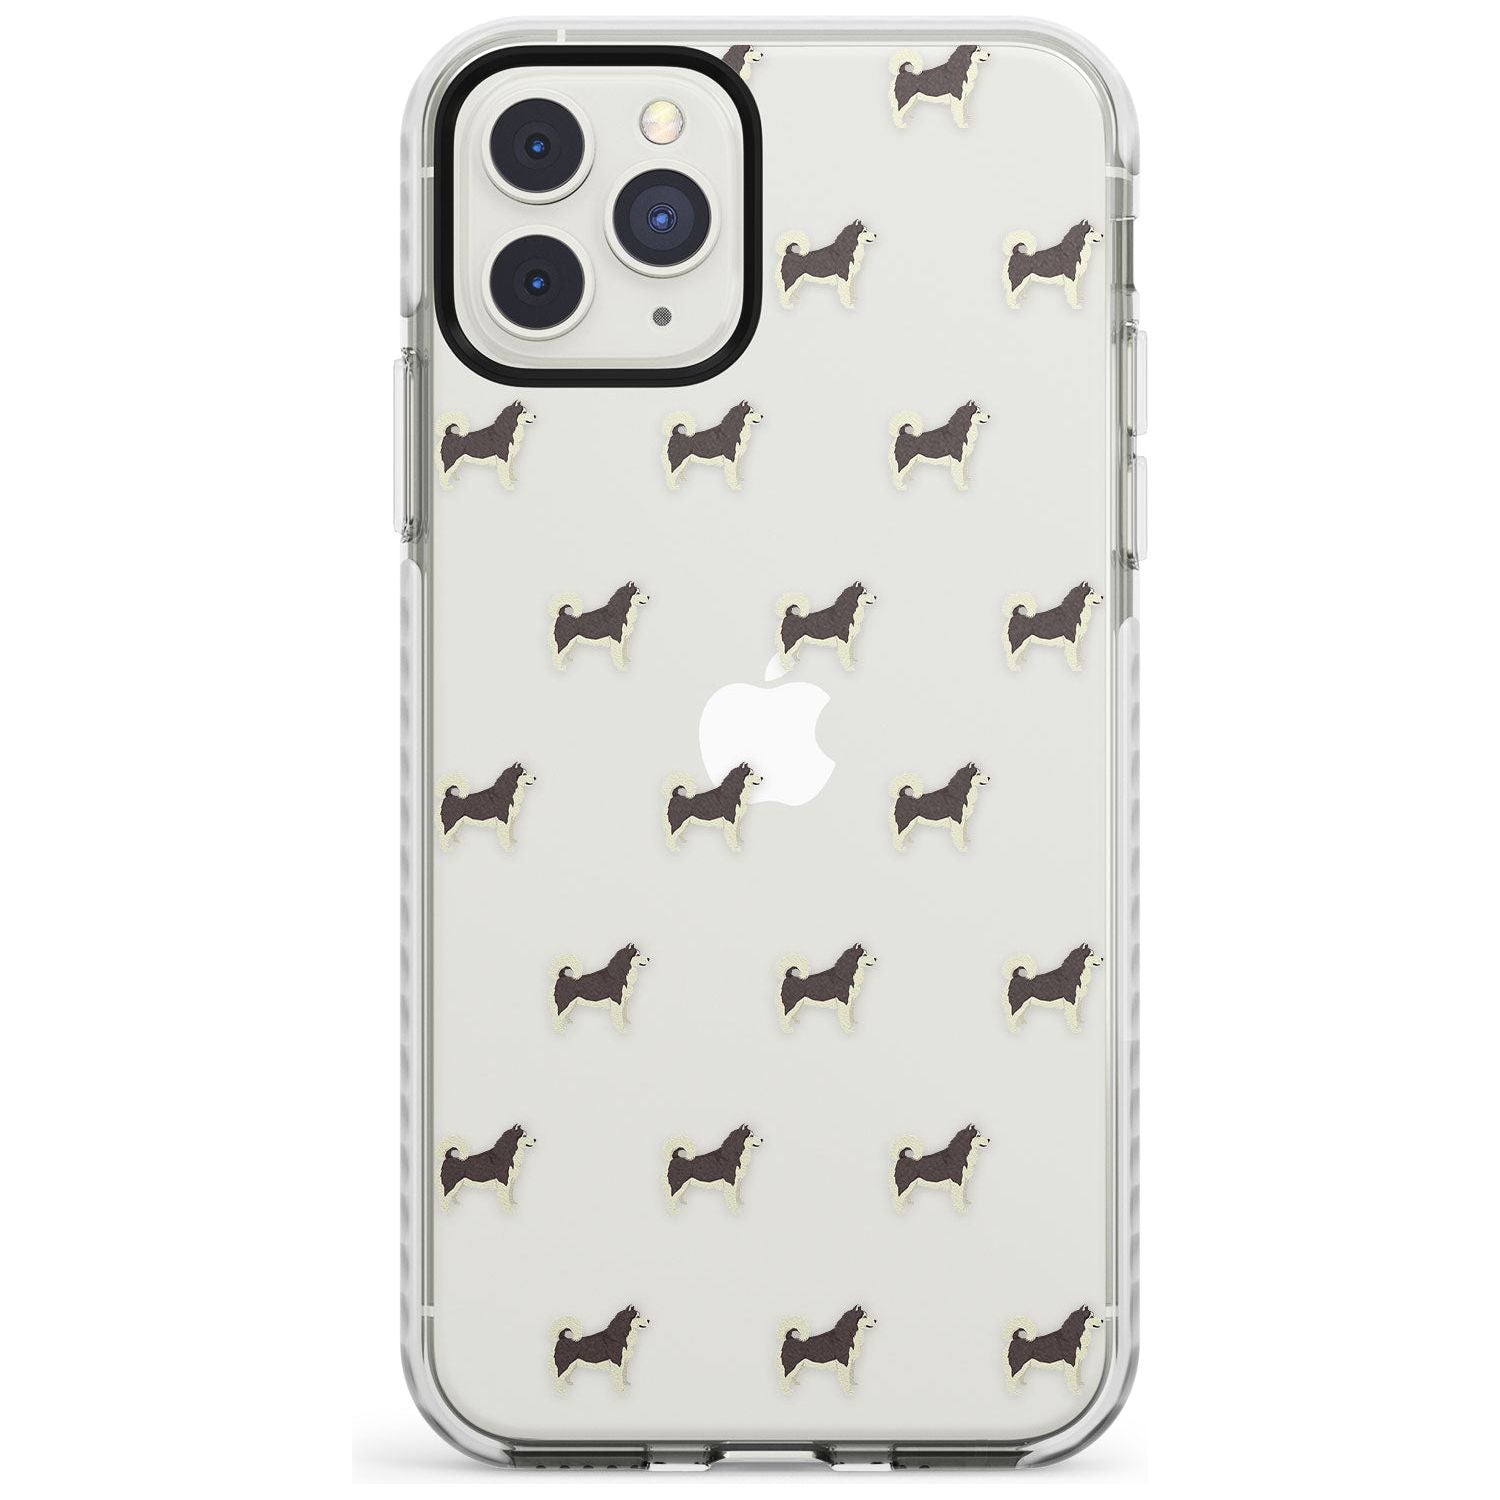 Alaskan Malamute Dog Pattern Clear Impact Phone Case for iPhone 11 Pro Max